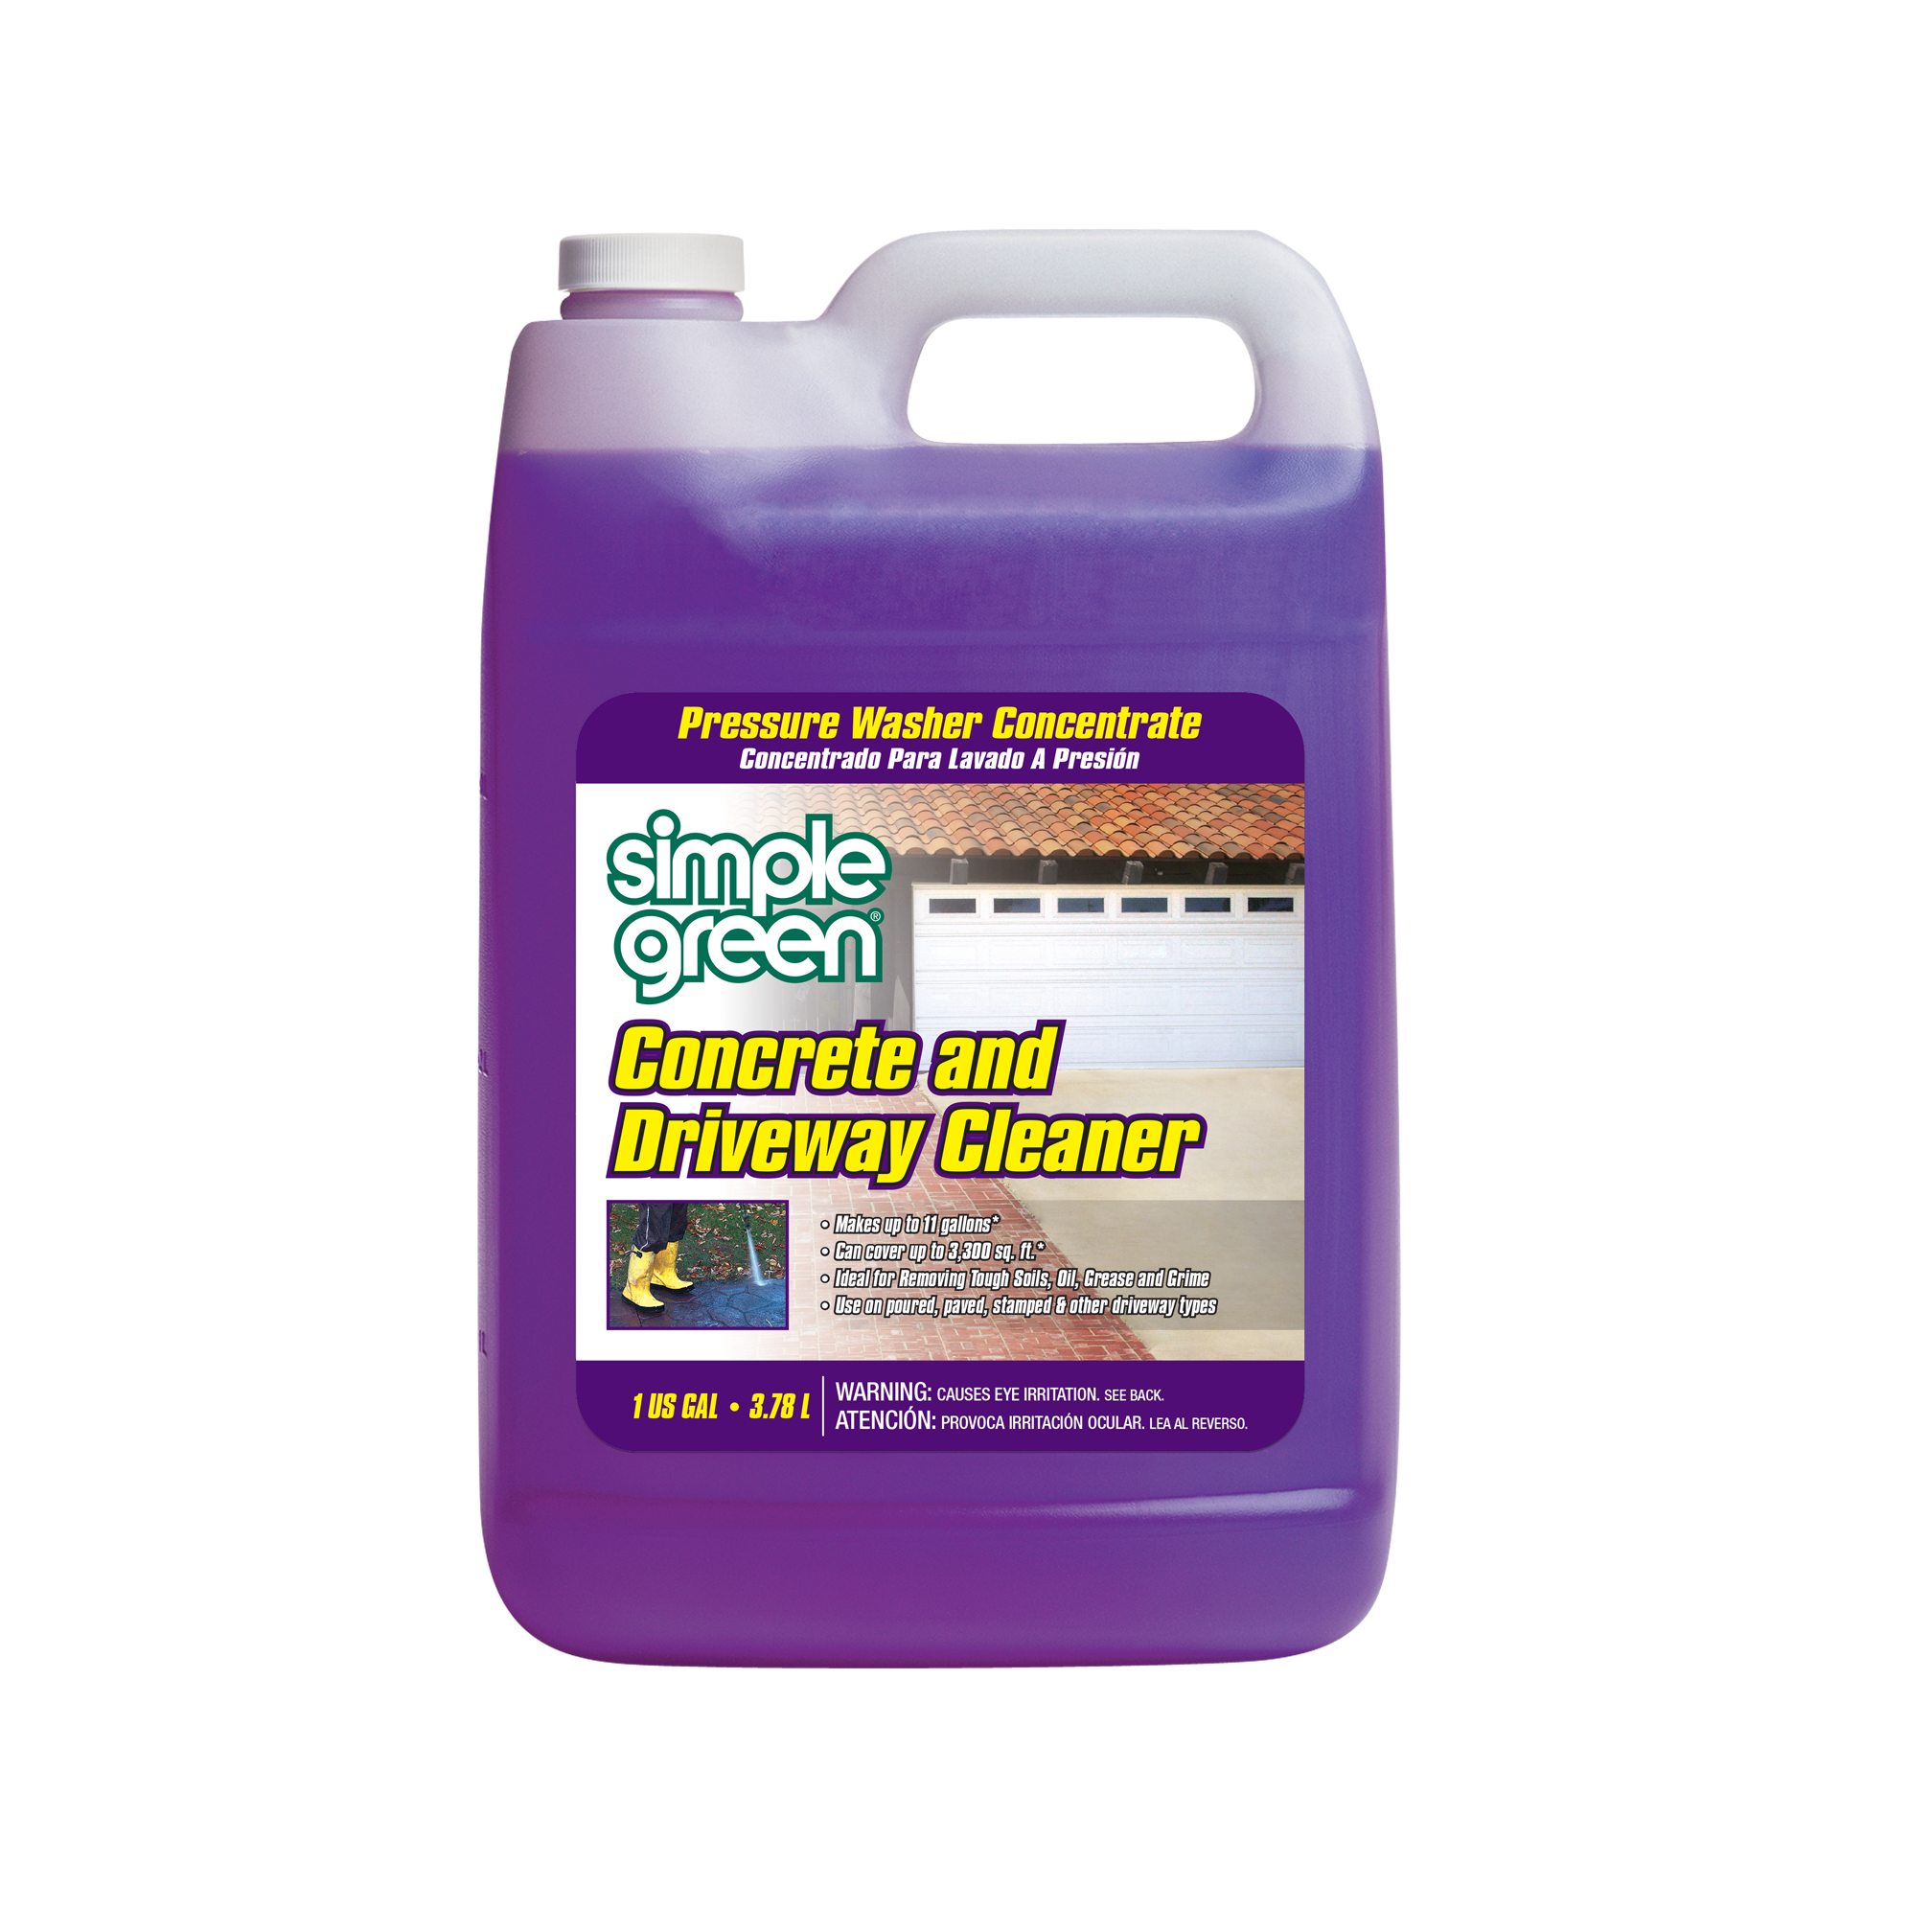 Don't use simply green or 30 second outdoor cleaner for a driveway